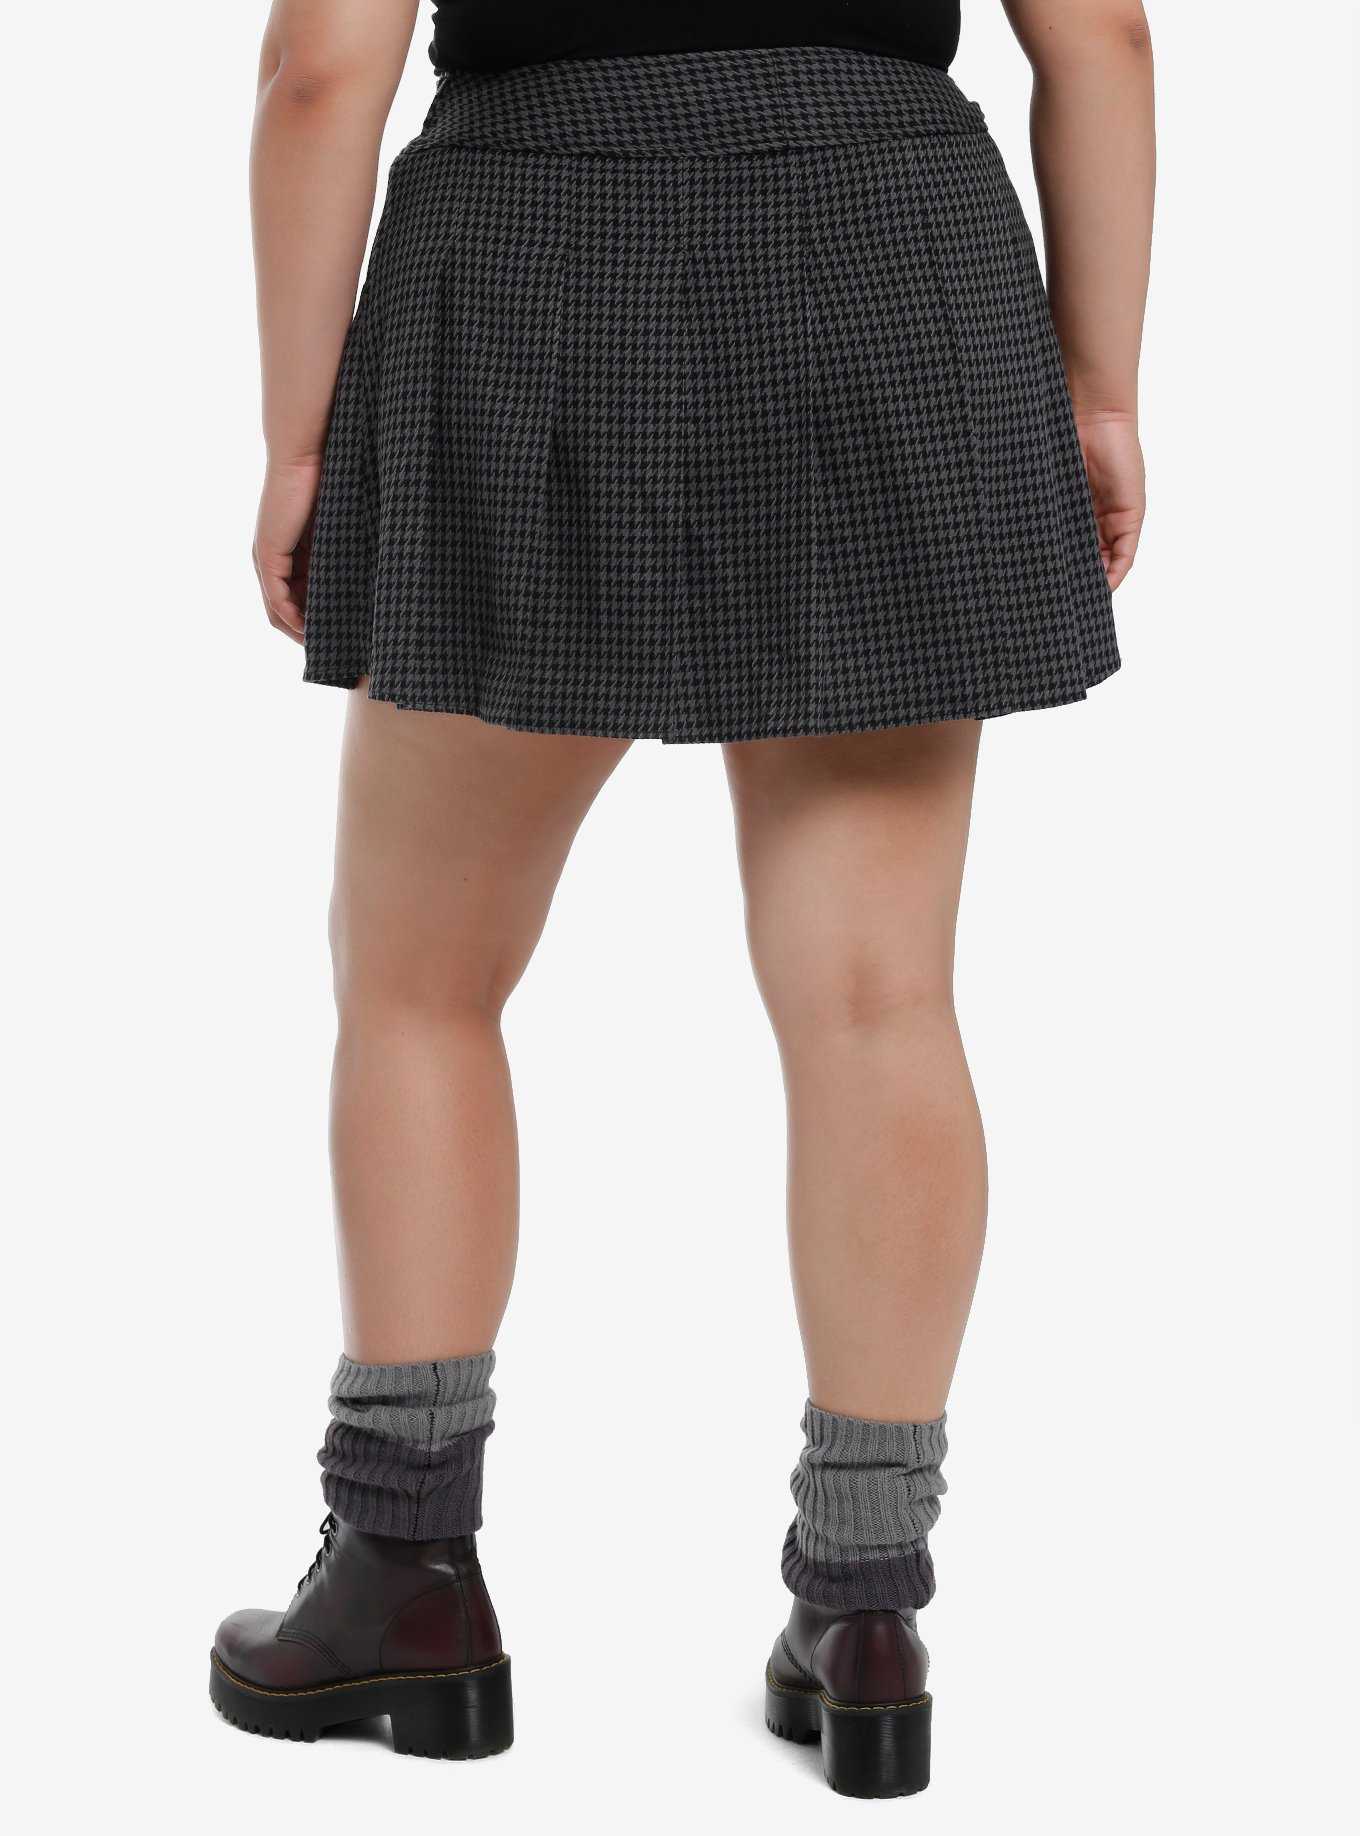 Social Collision Black & Grey Houndstooth Pleated Skirt Plus Size, , hi-res